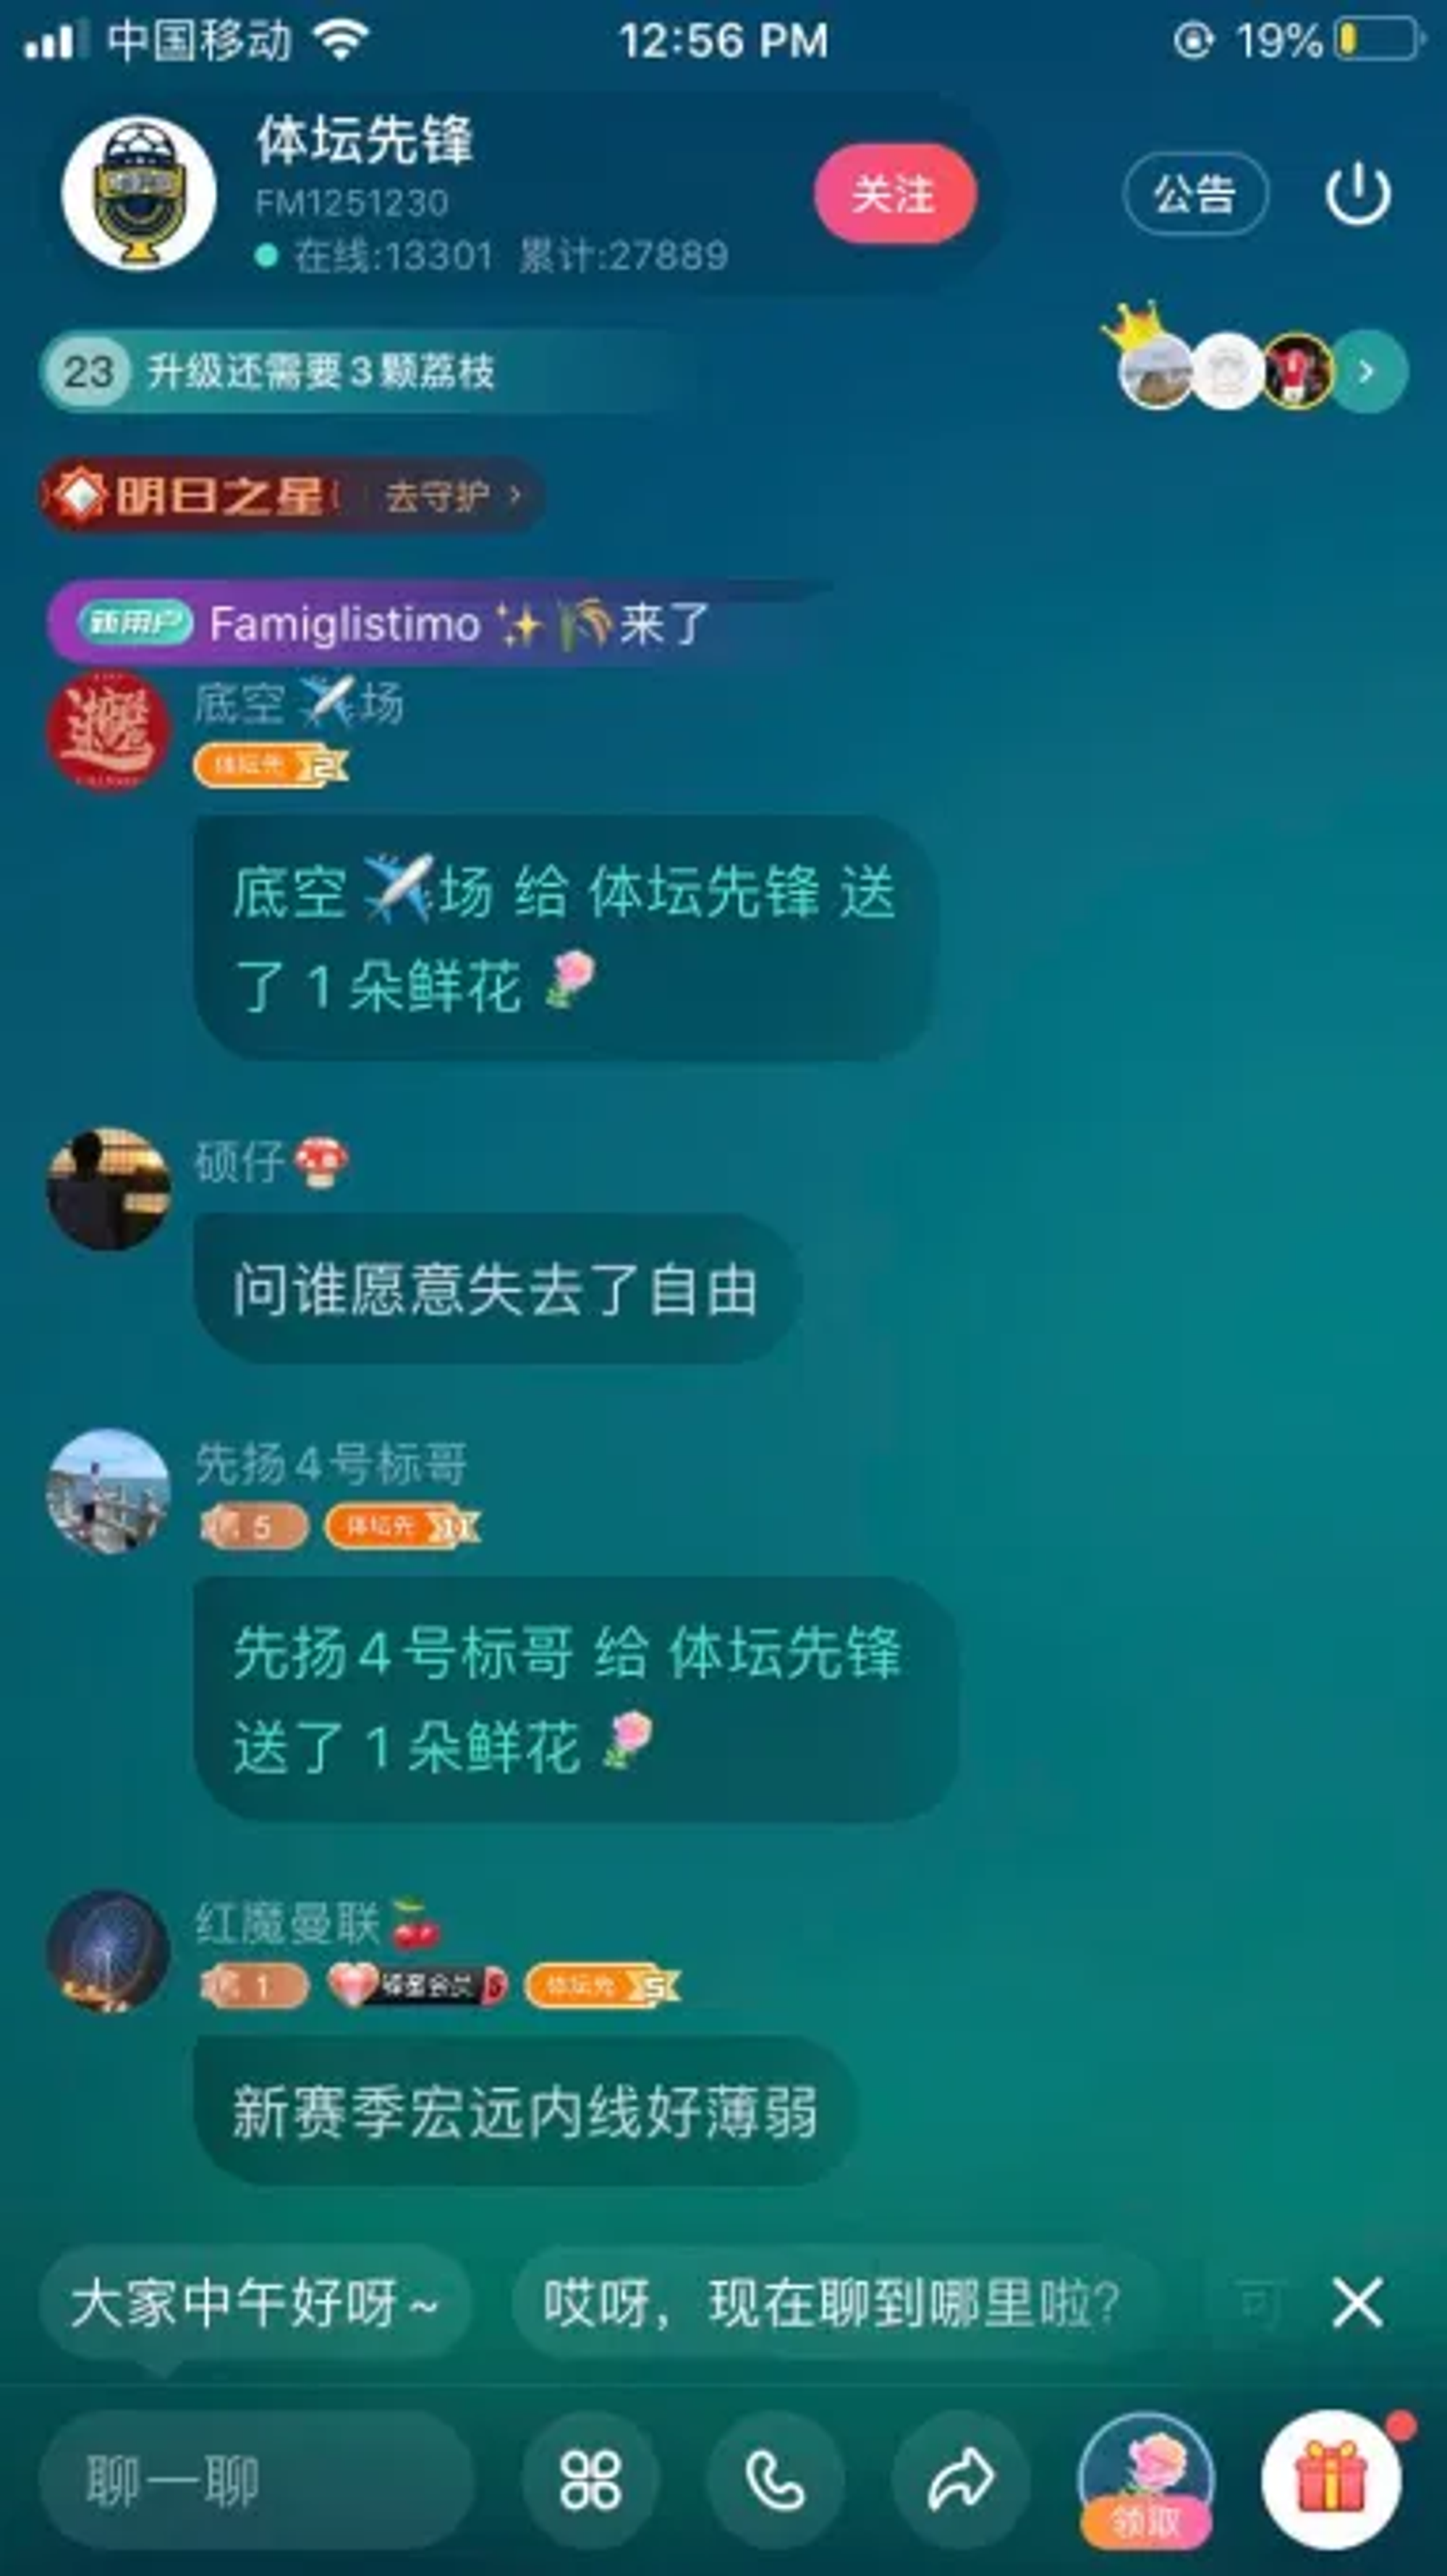 Screenshot of Lizhi: Listeners can send real-time comments and virtual gifts to audio streaming hosts. Image credit: TechCrunch